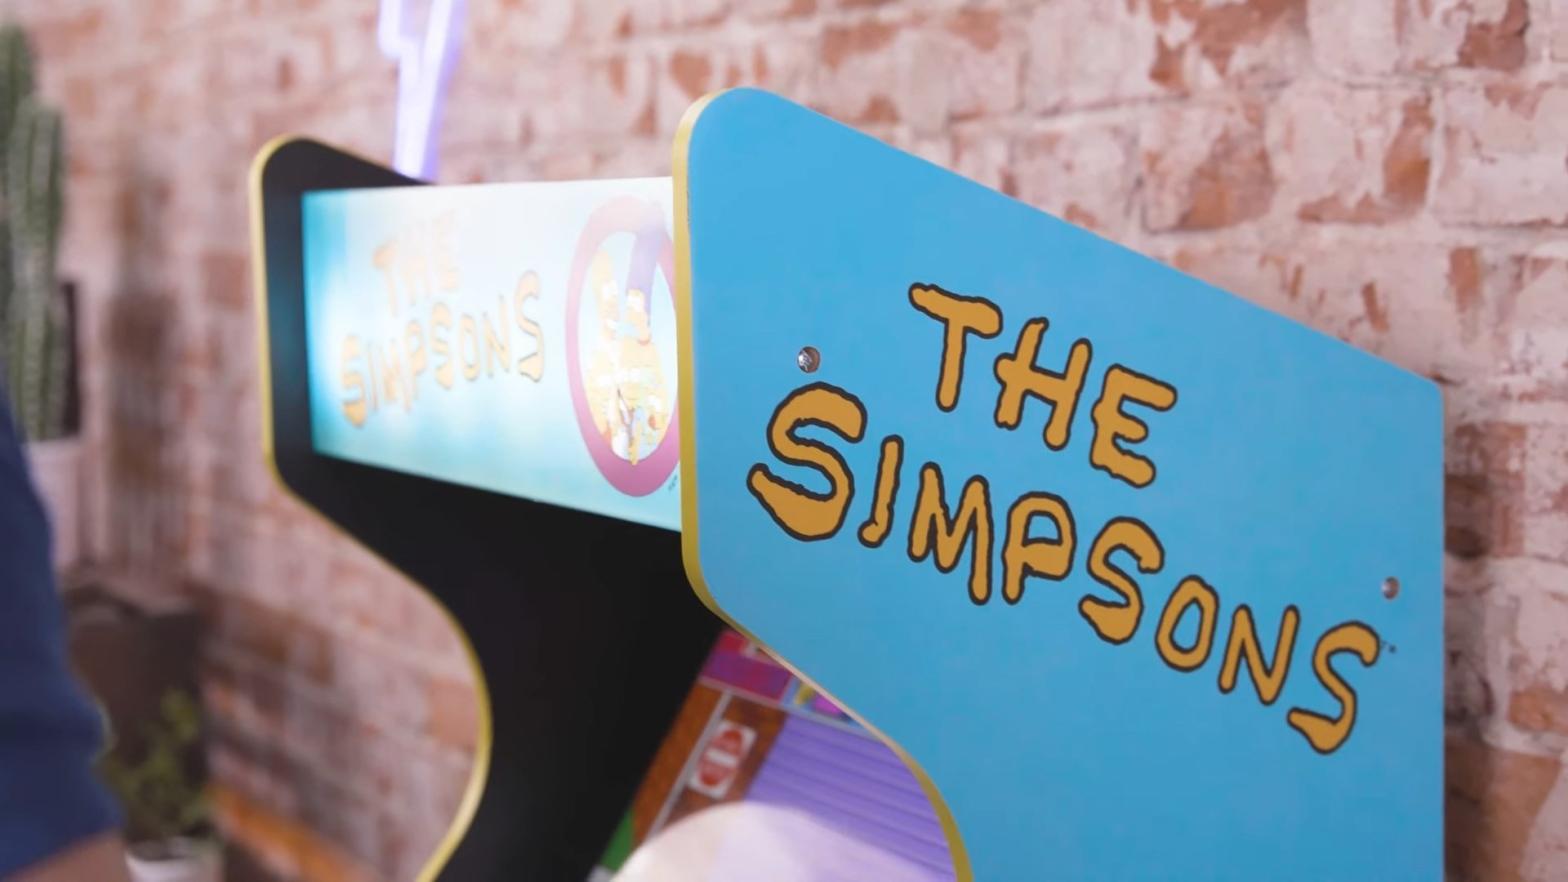 The top of a blue arcade cabinet with the logo for The Simpsons